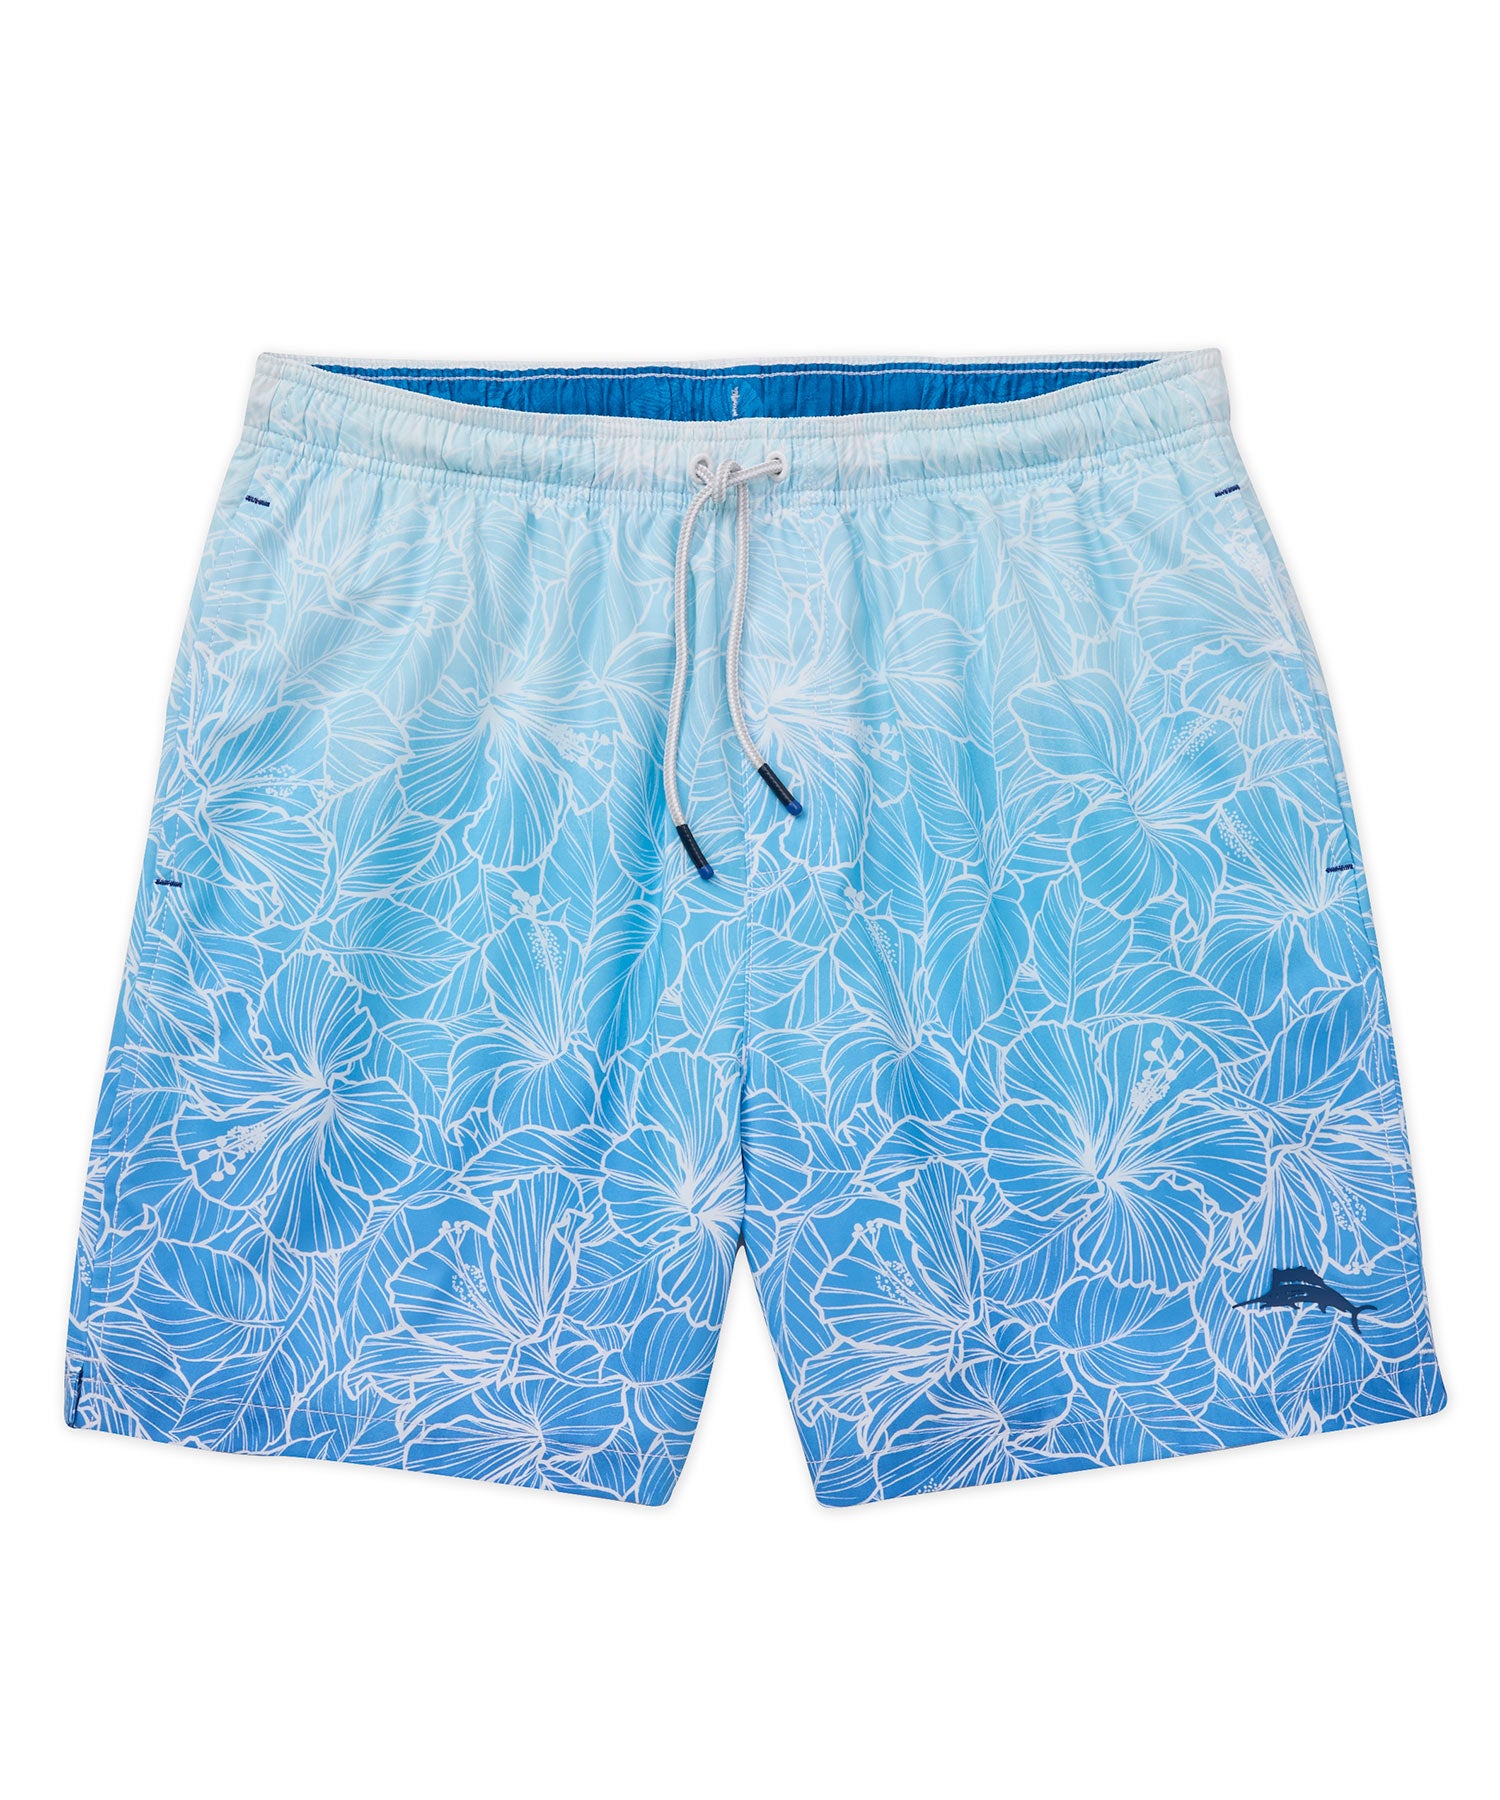 Tommy Bahama Naples 'High Tides Hibiscus' Swim Trunk